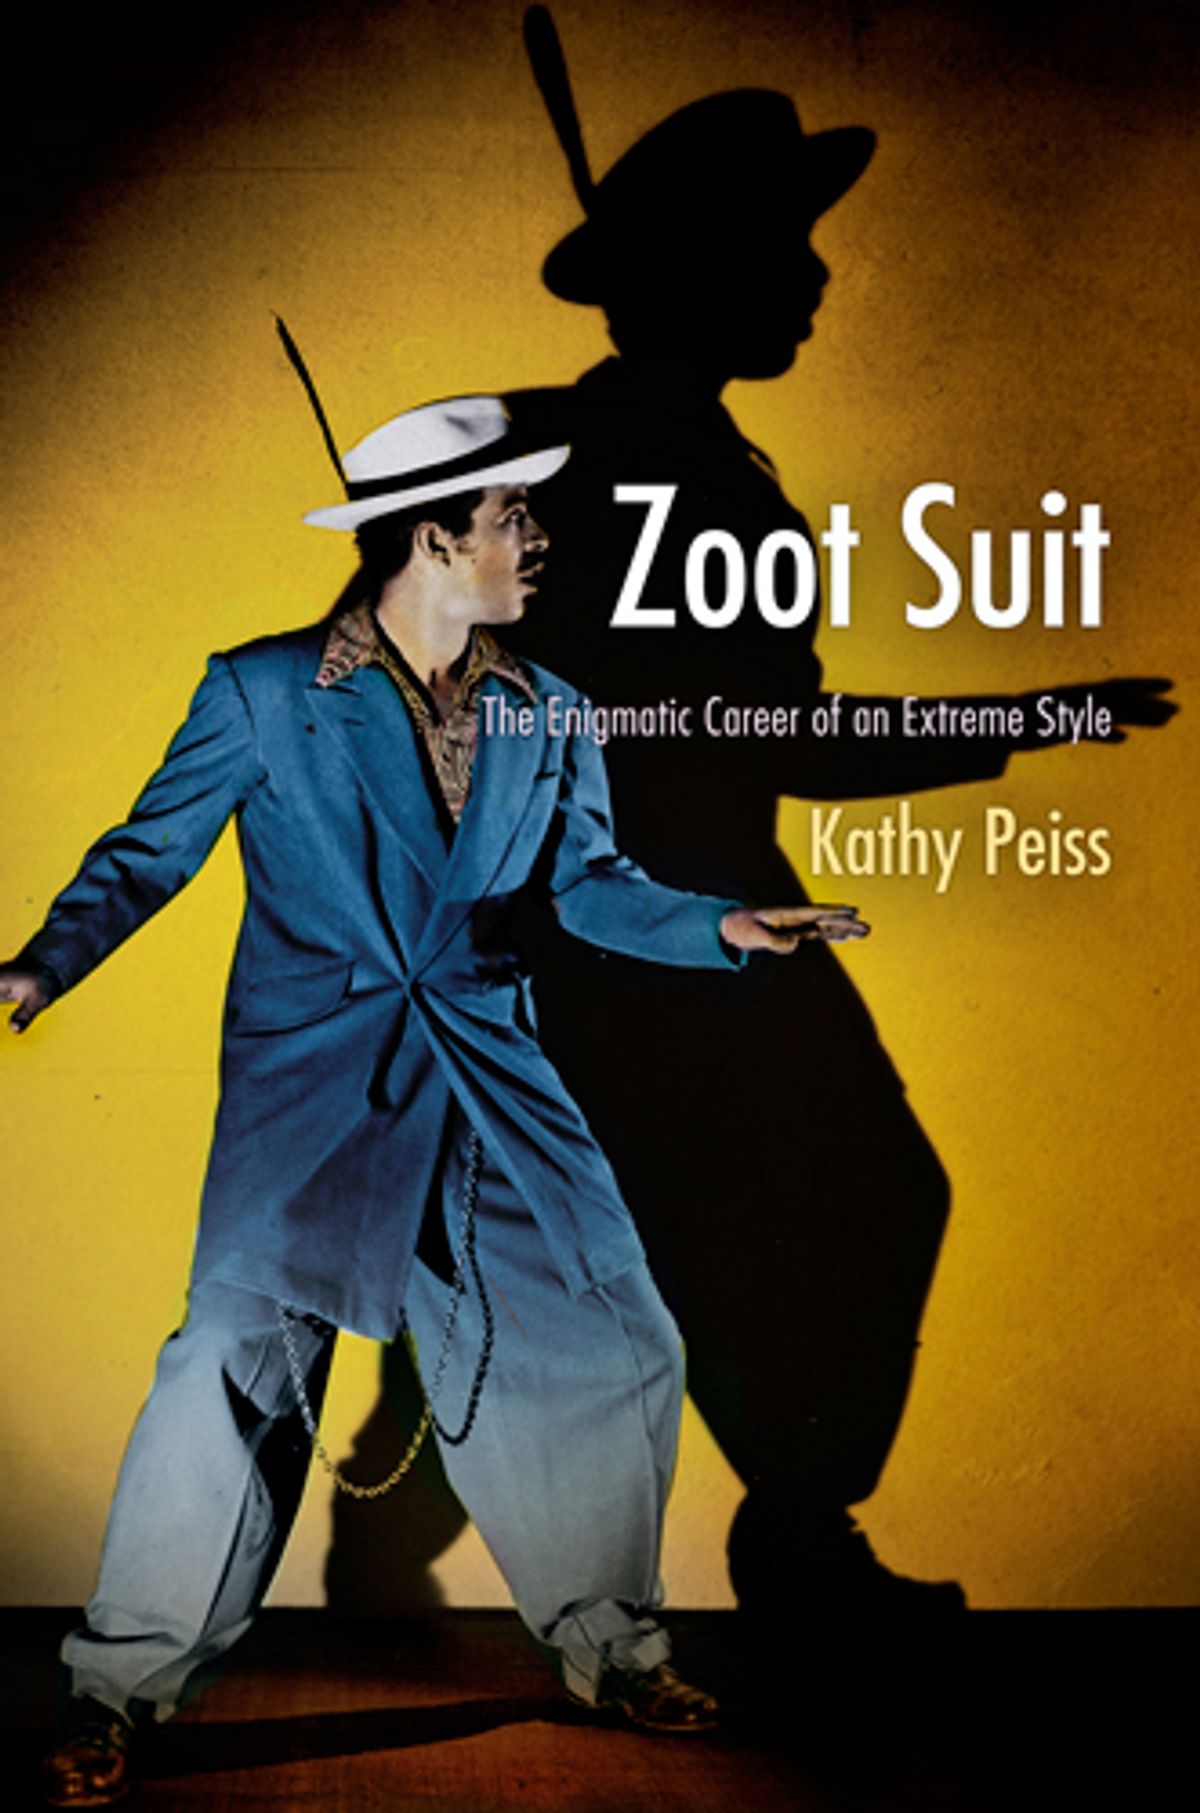 Cover of Zoot Suit The Enigmatic Career of an Extreme Style by Kathy Peiss